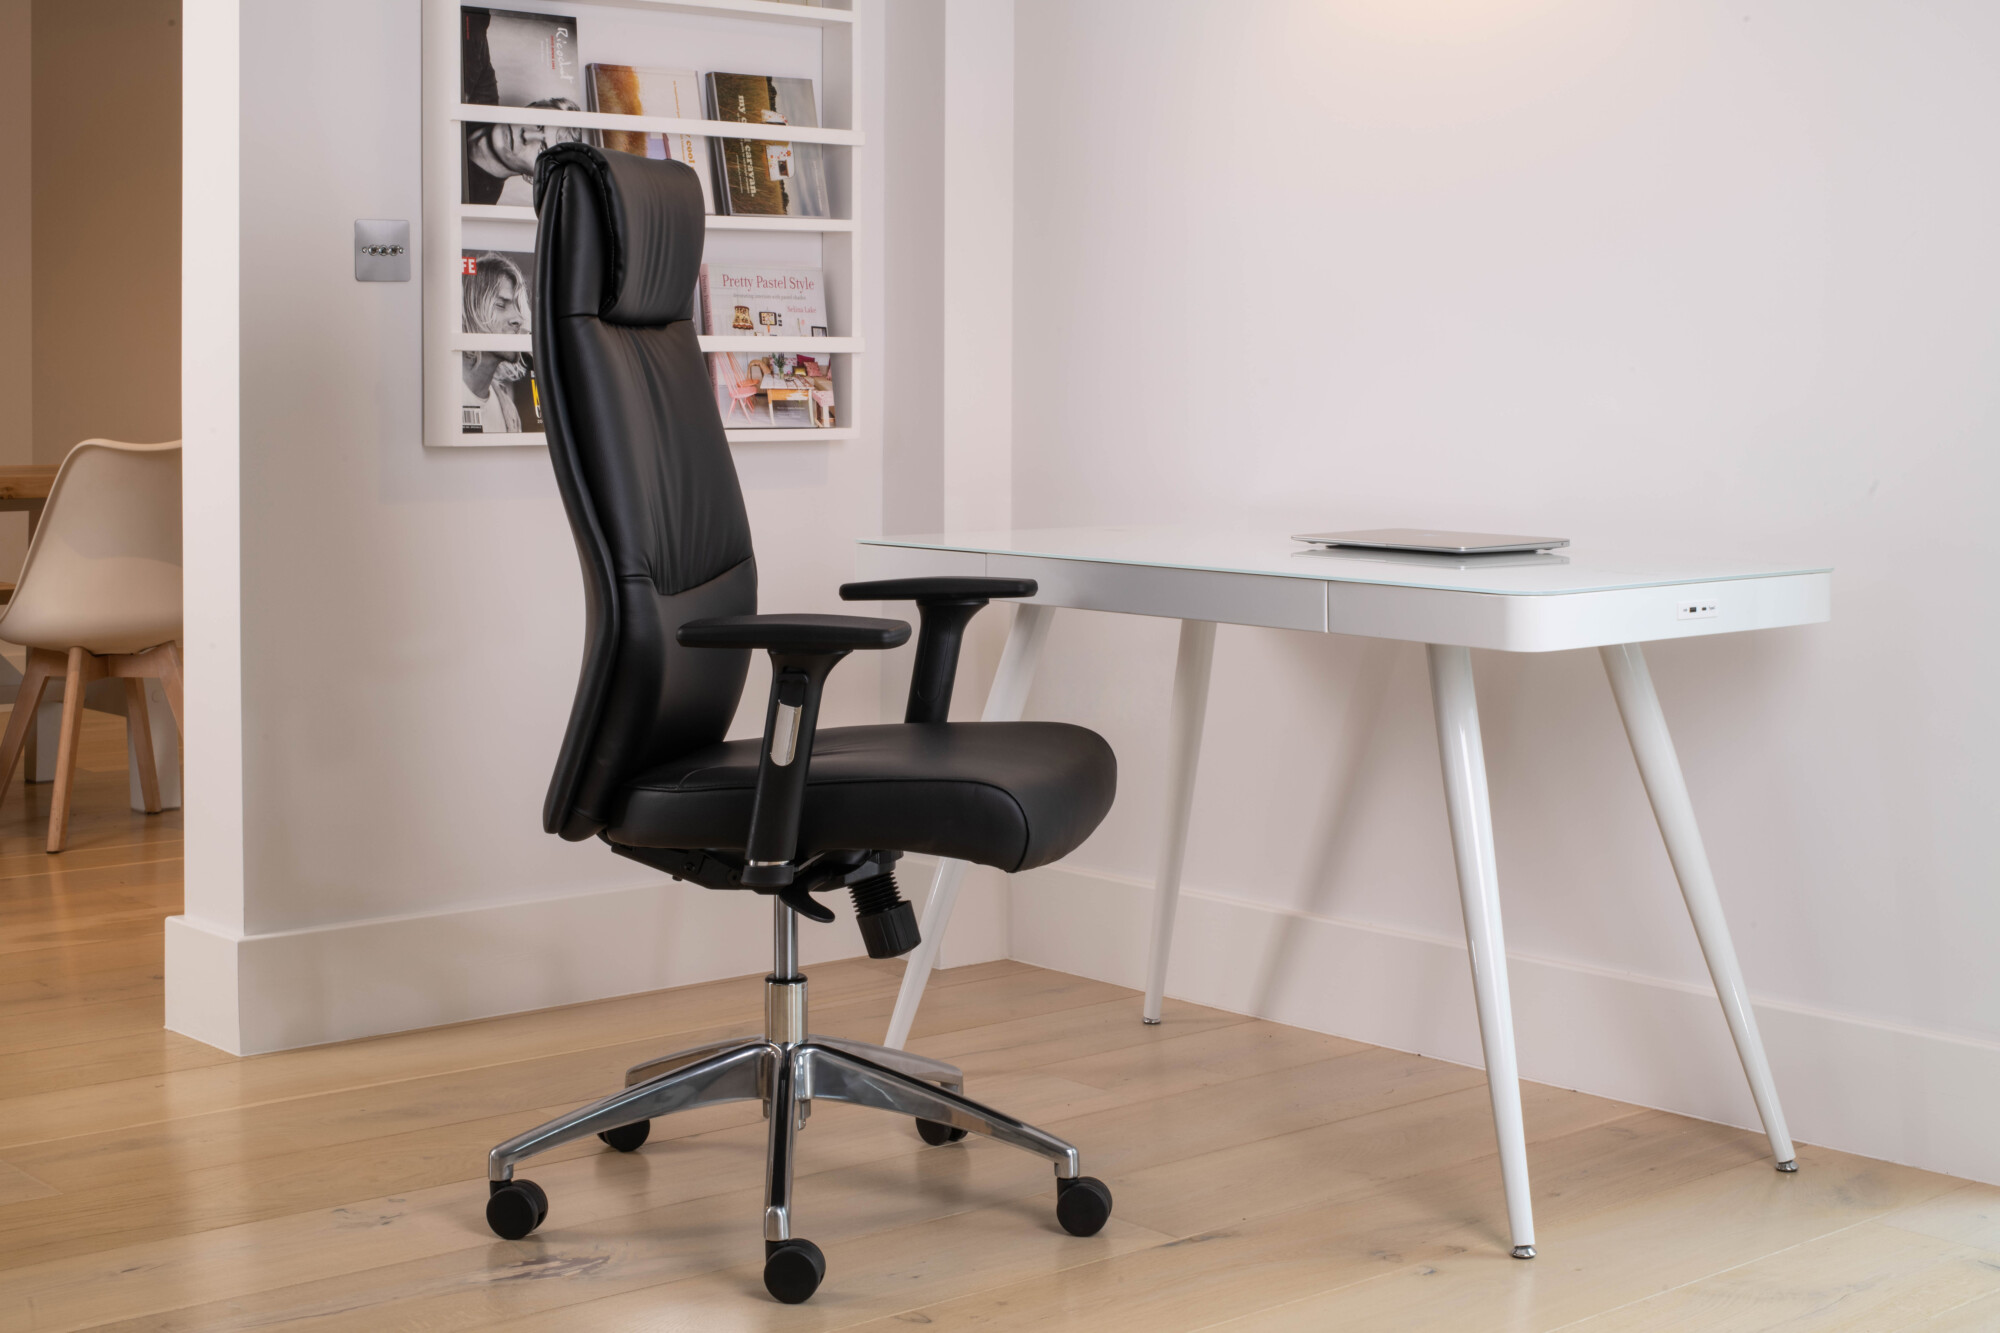 Karls's executive ergonomic chair by Koble Designs, an all-black faux leather chair. 